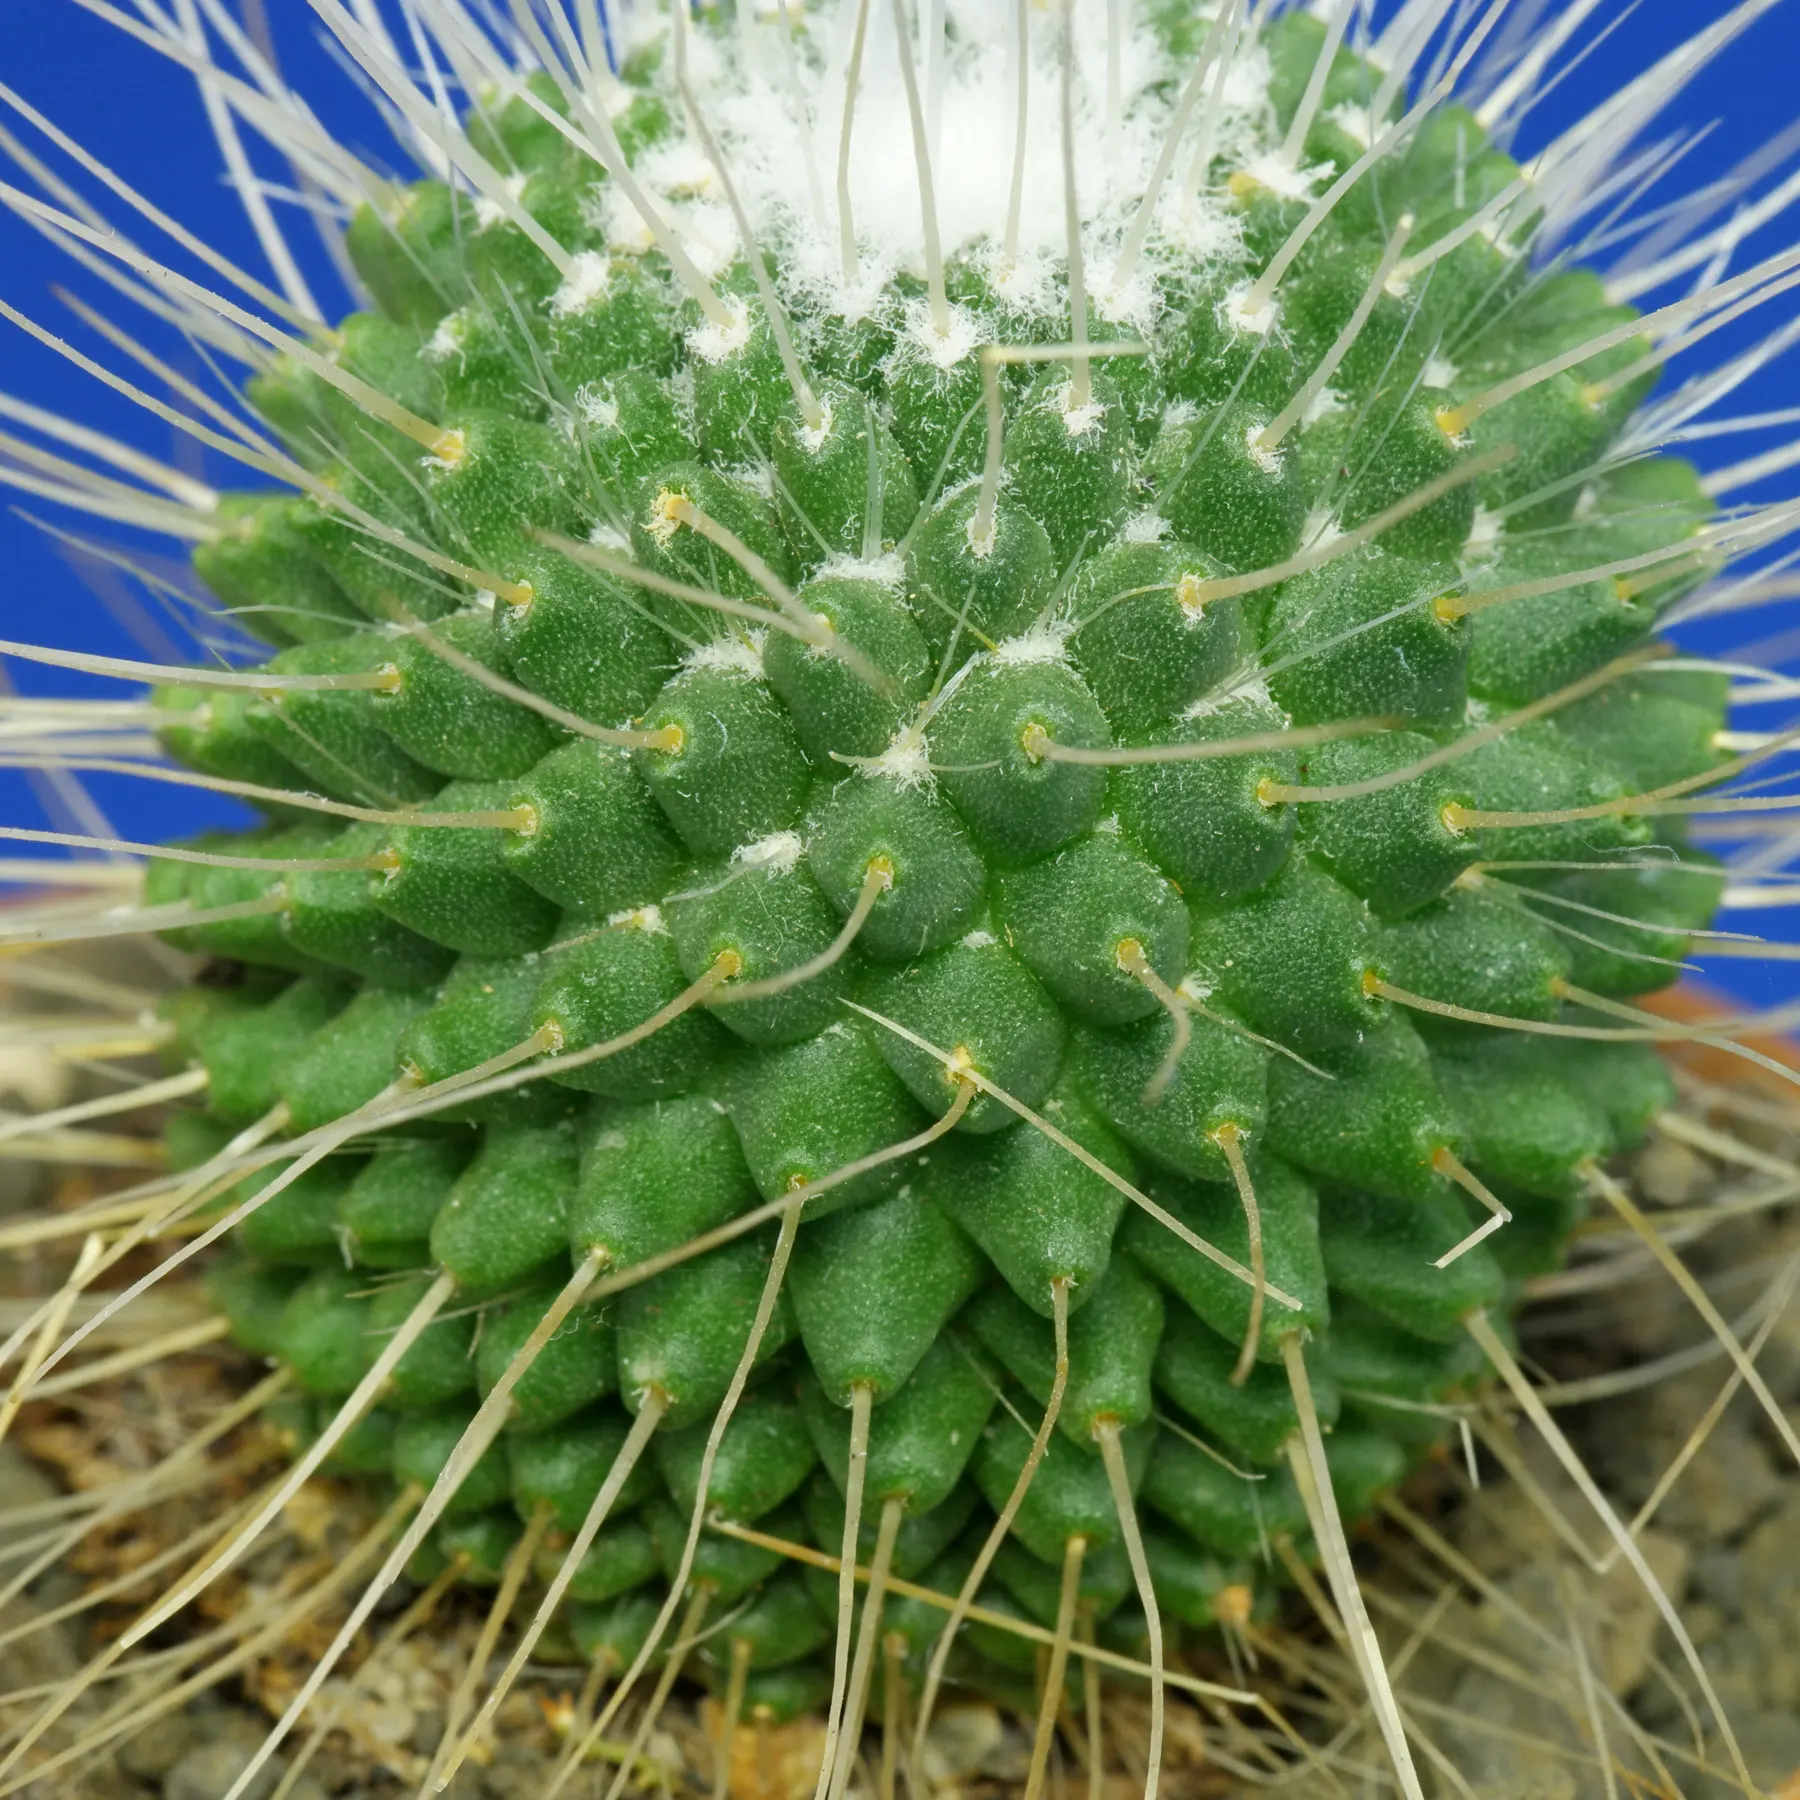 Spiny Pincushion Cactus areoles